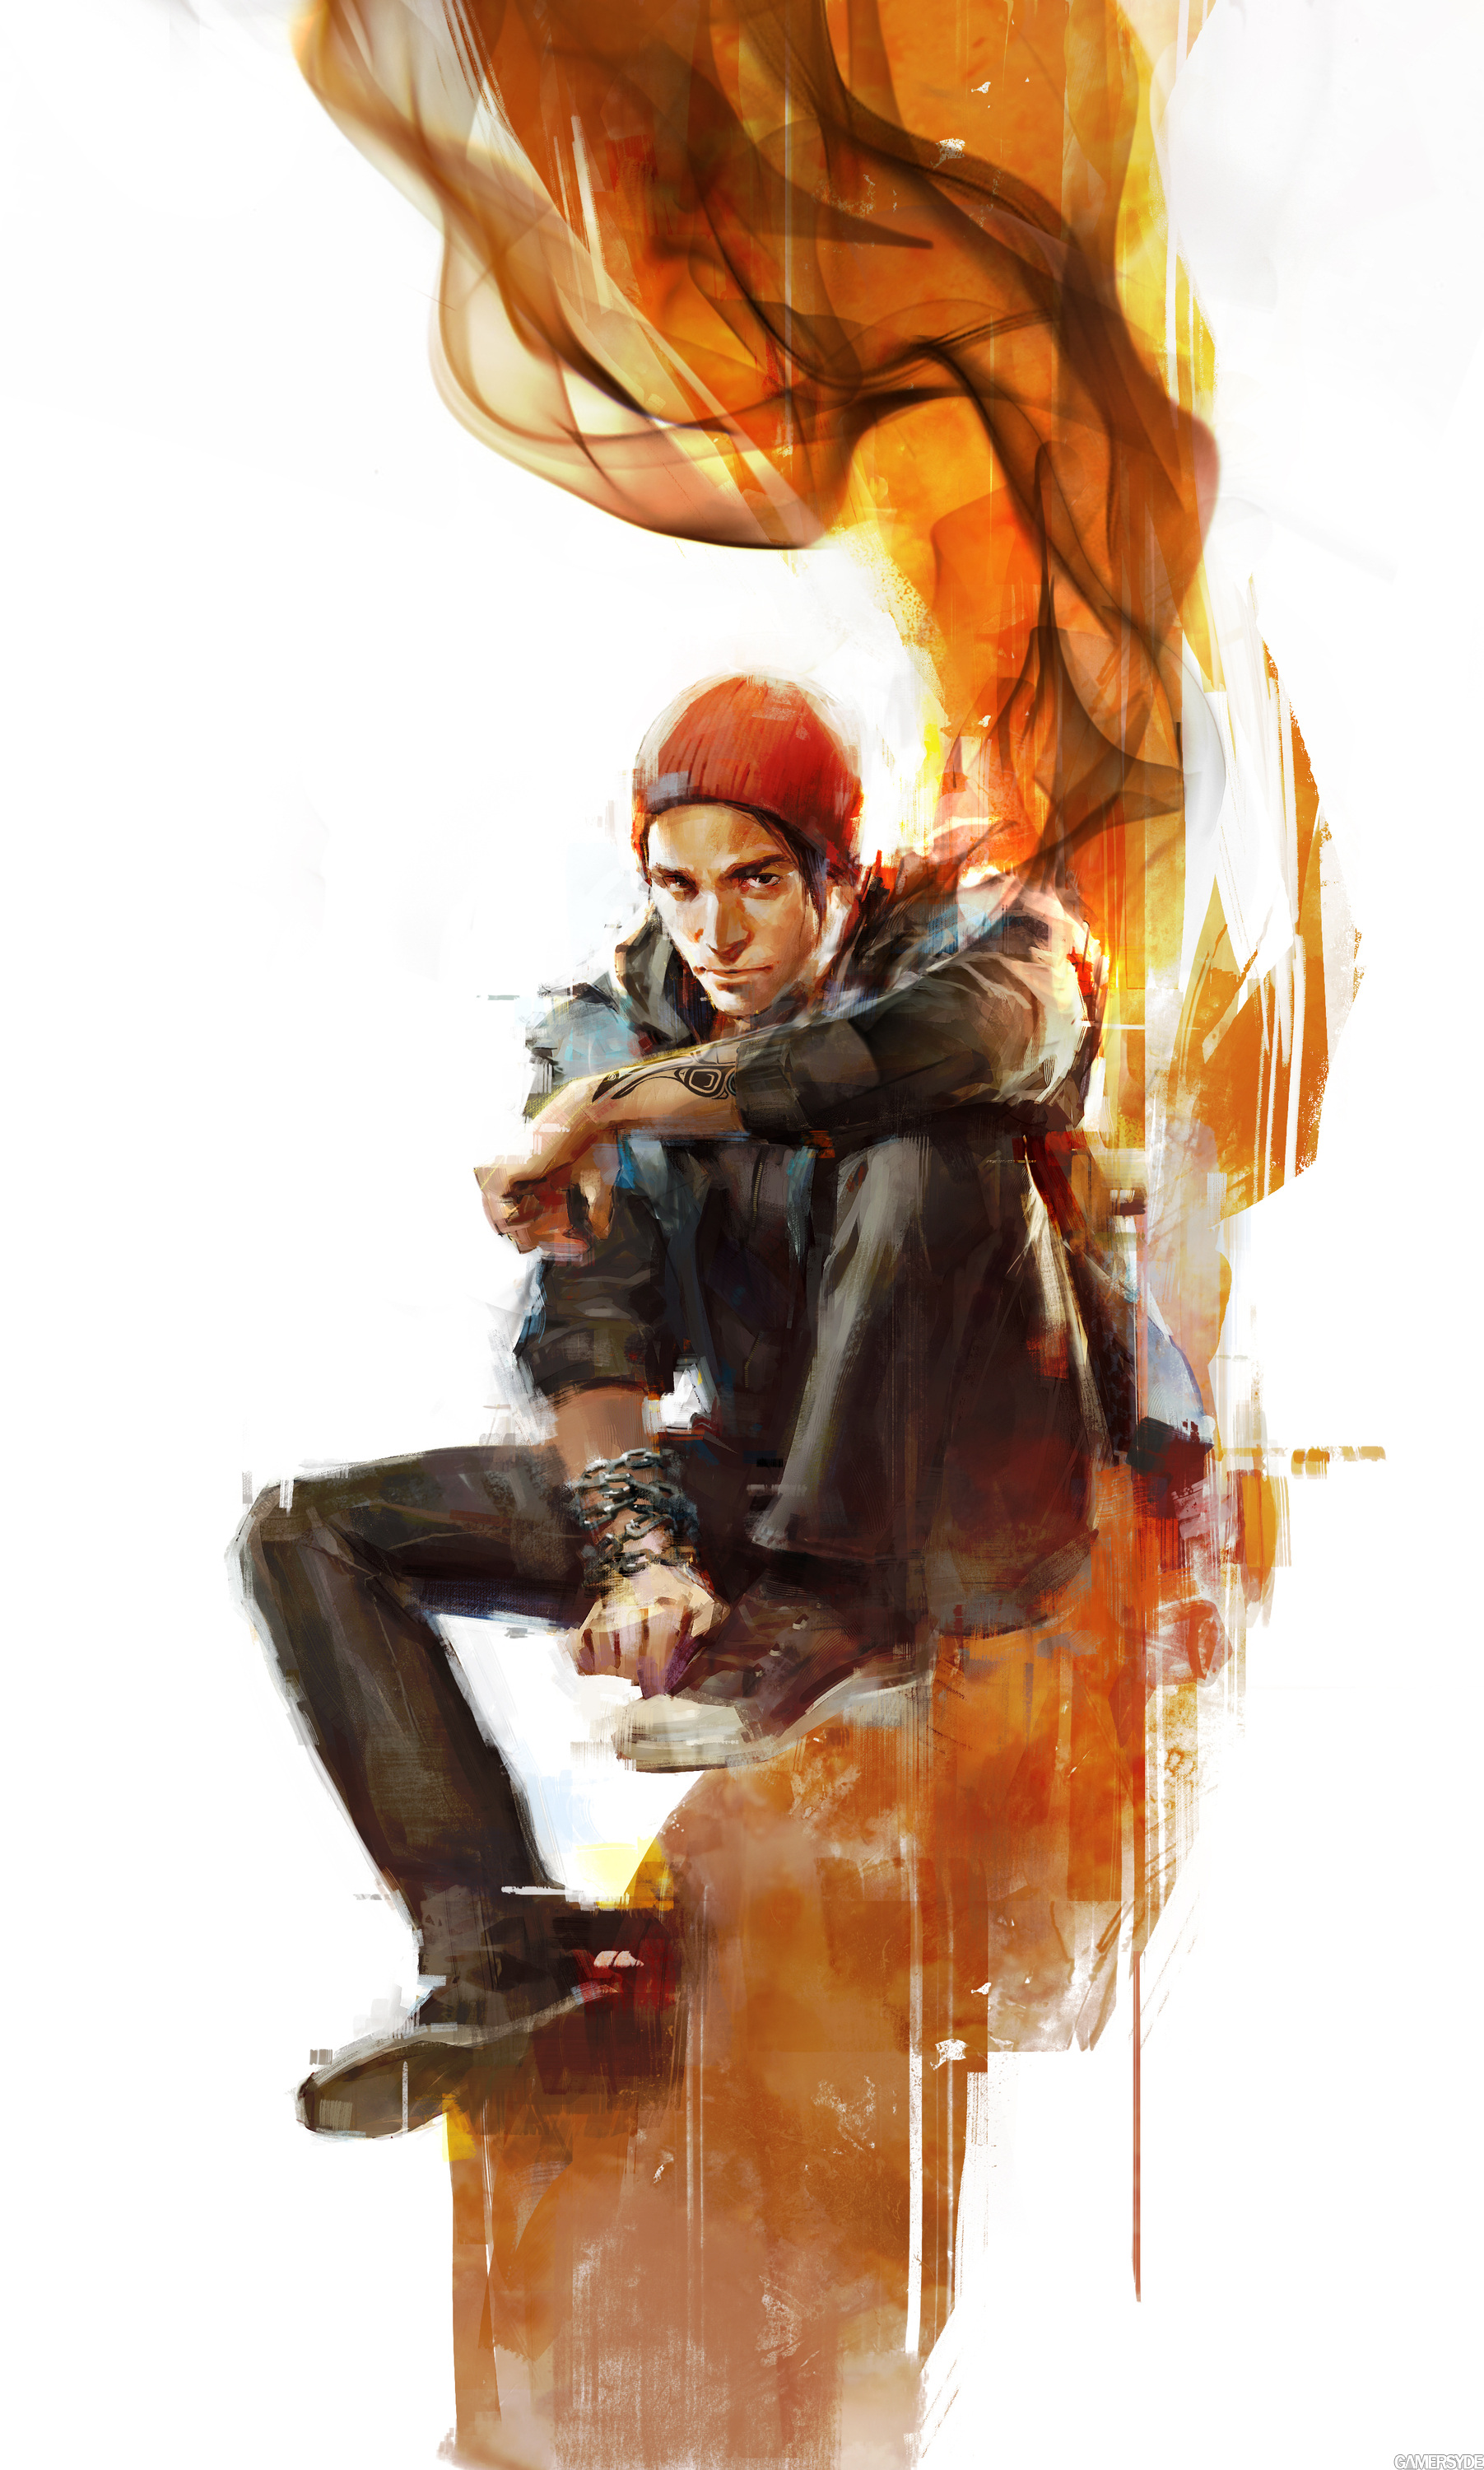 image_infamous_second_son-22144-2661_0002.jpg